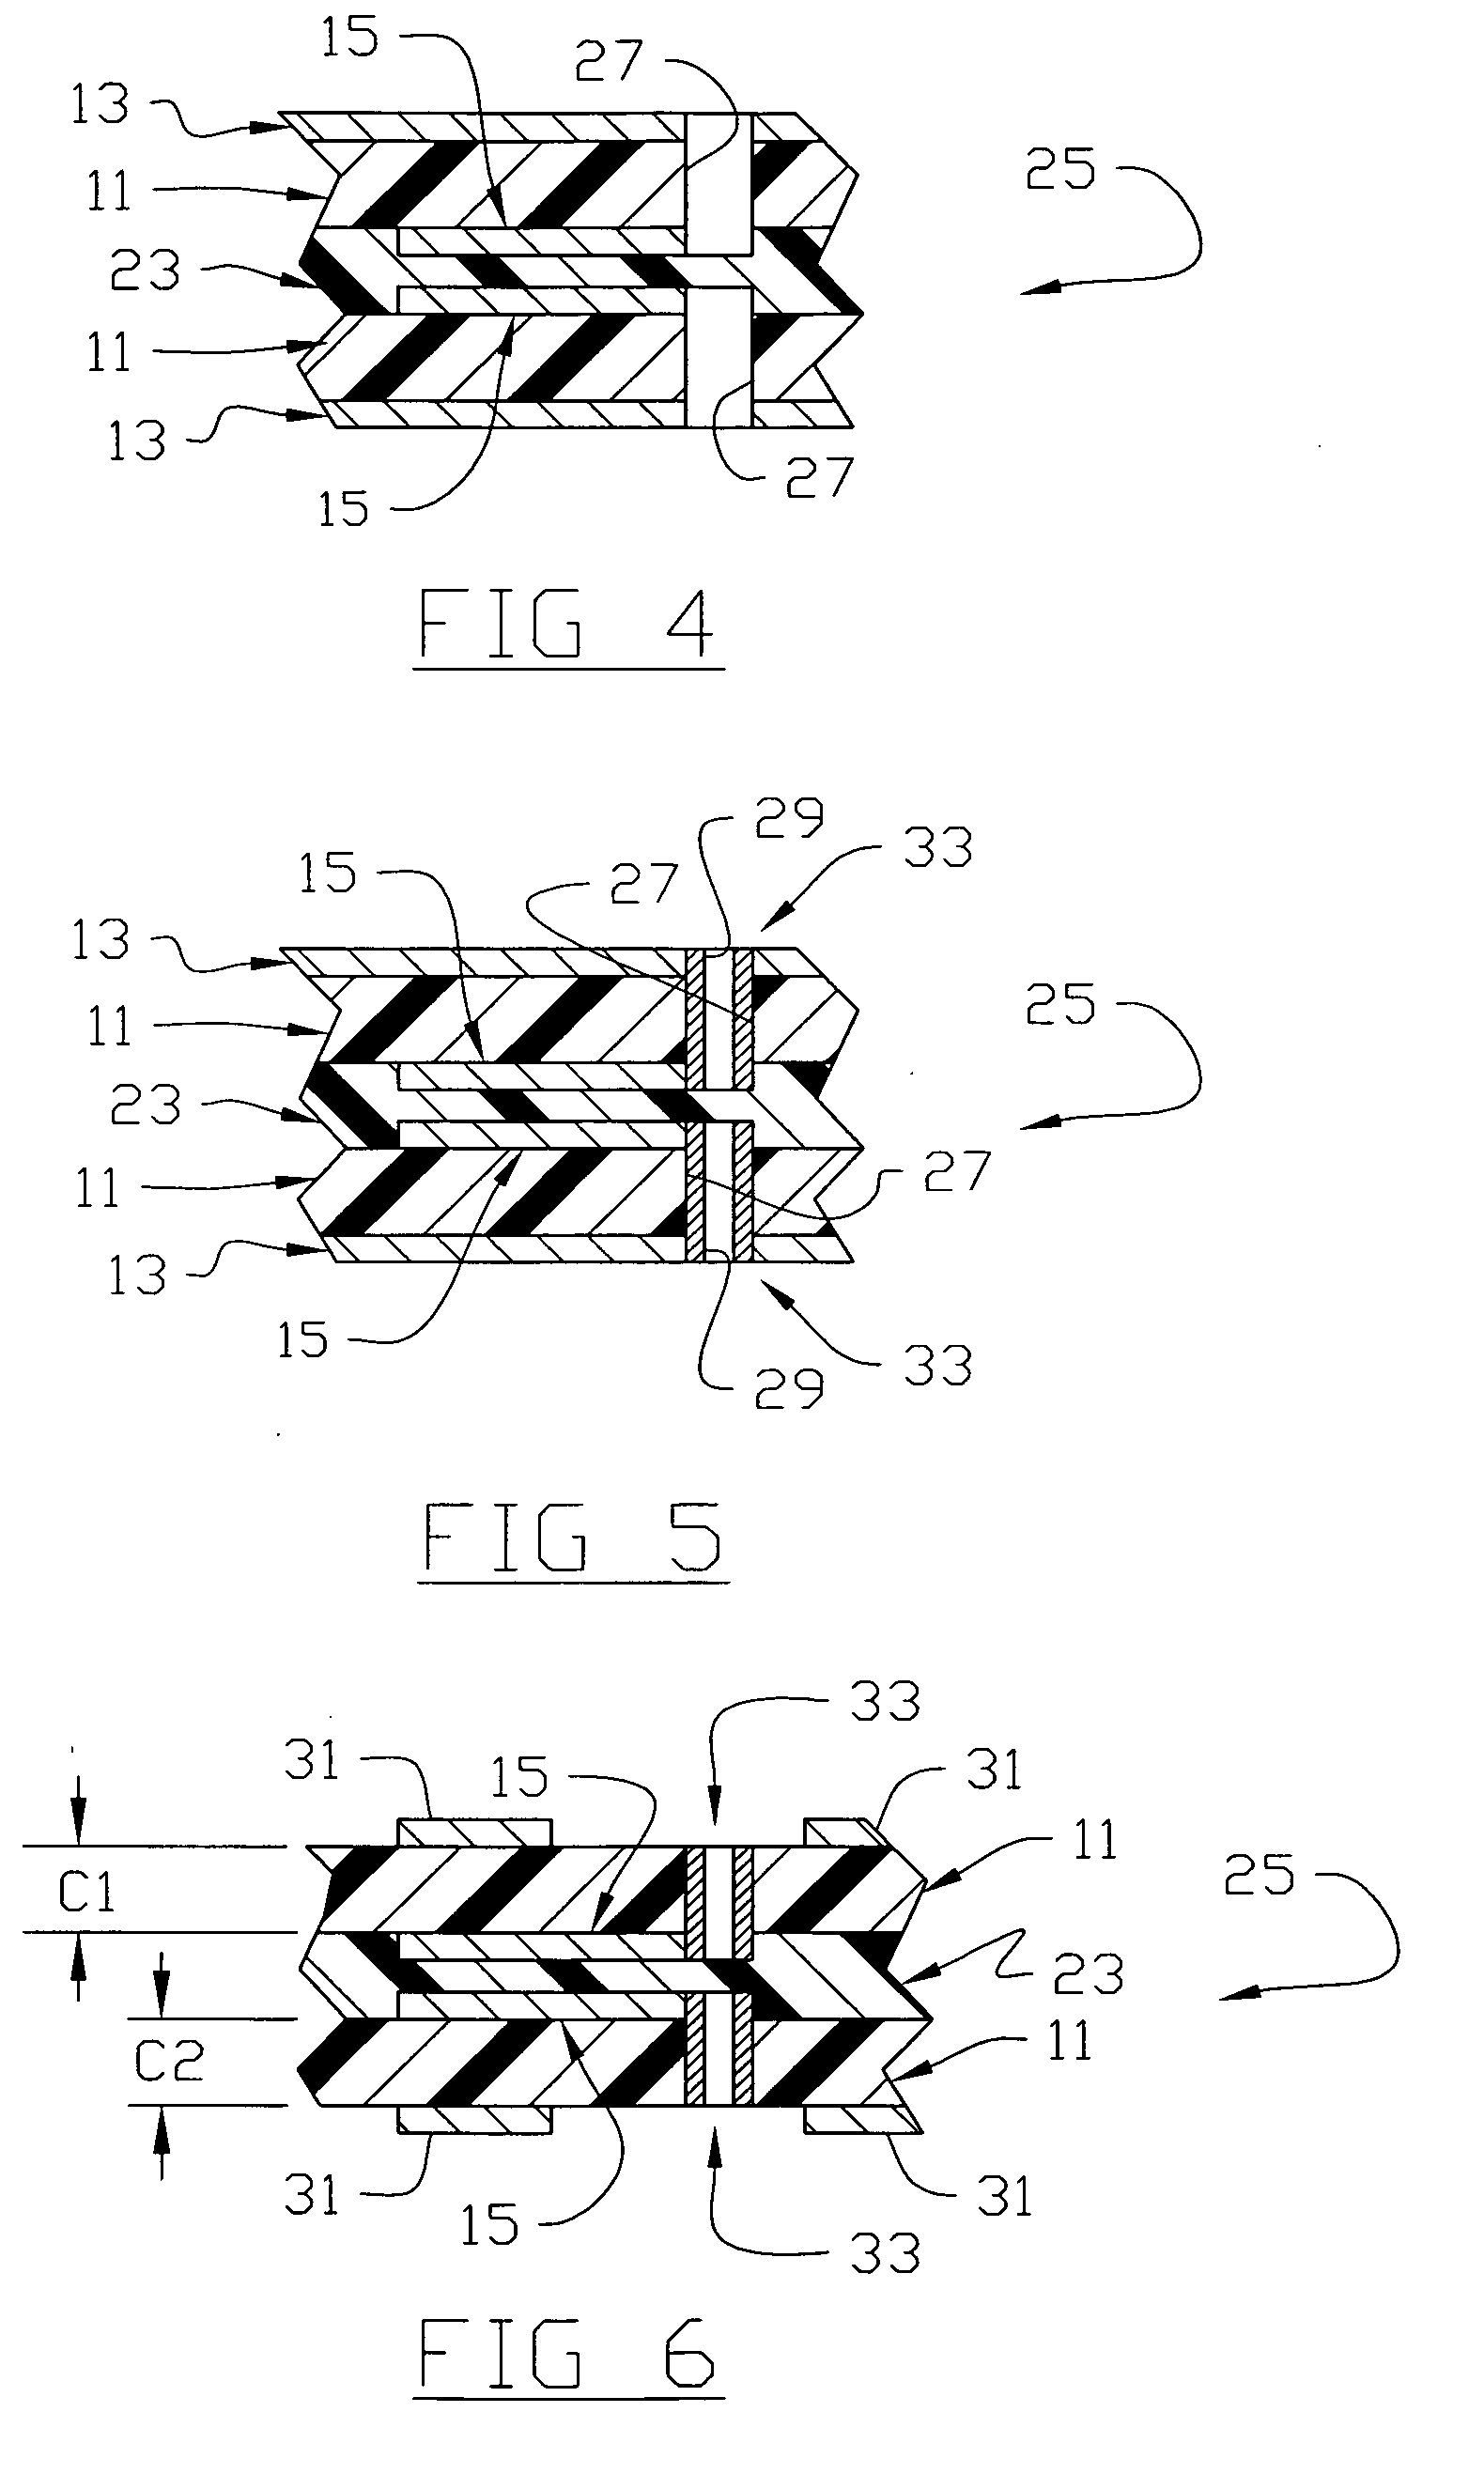 Method of making an internal capacitive substrate for use in a circuitized substrate and method of making said circuitized substrate